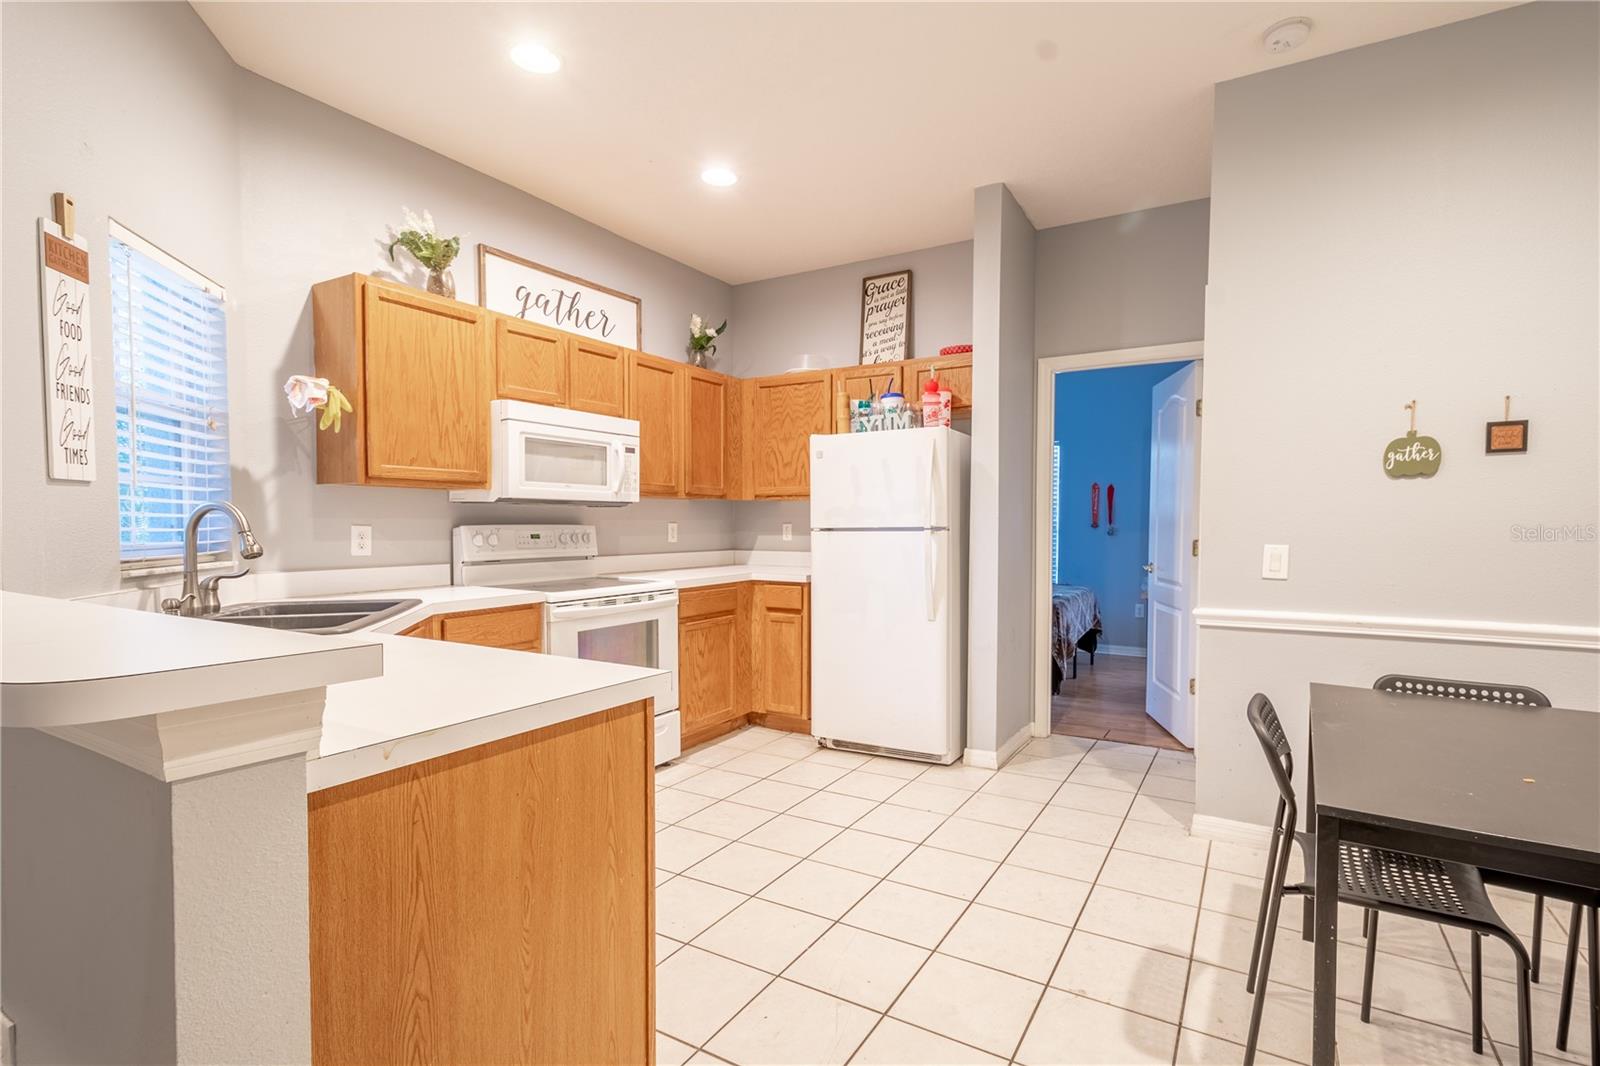 The open kitchen has wood cabinets and a full suite of appliances.